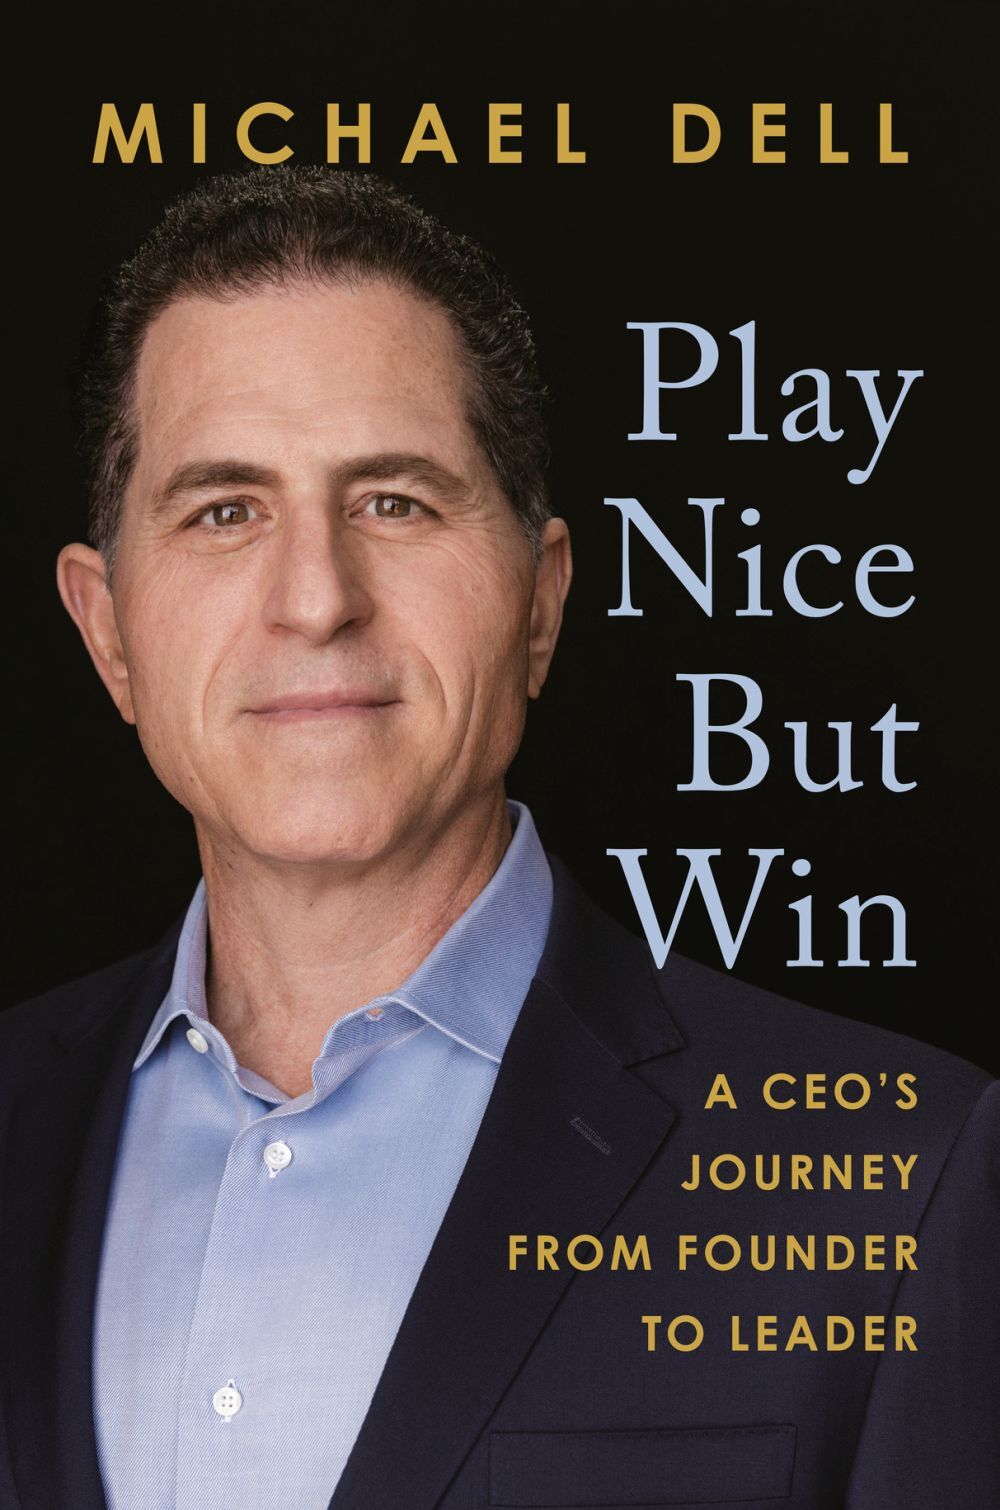 Dell氏の回顧録「Play Nice But Win」